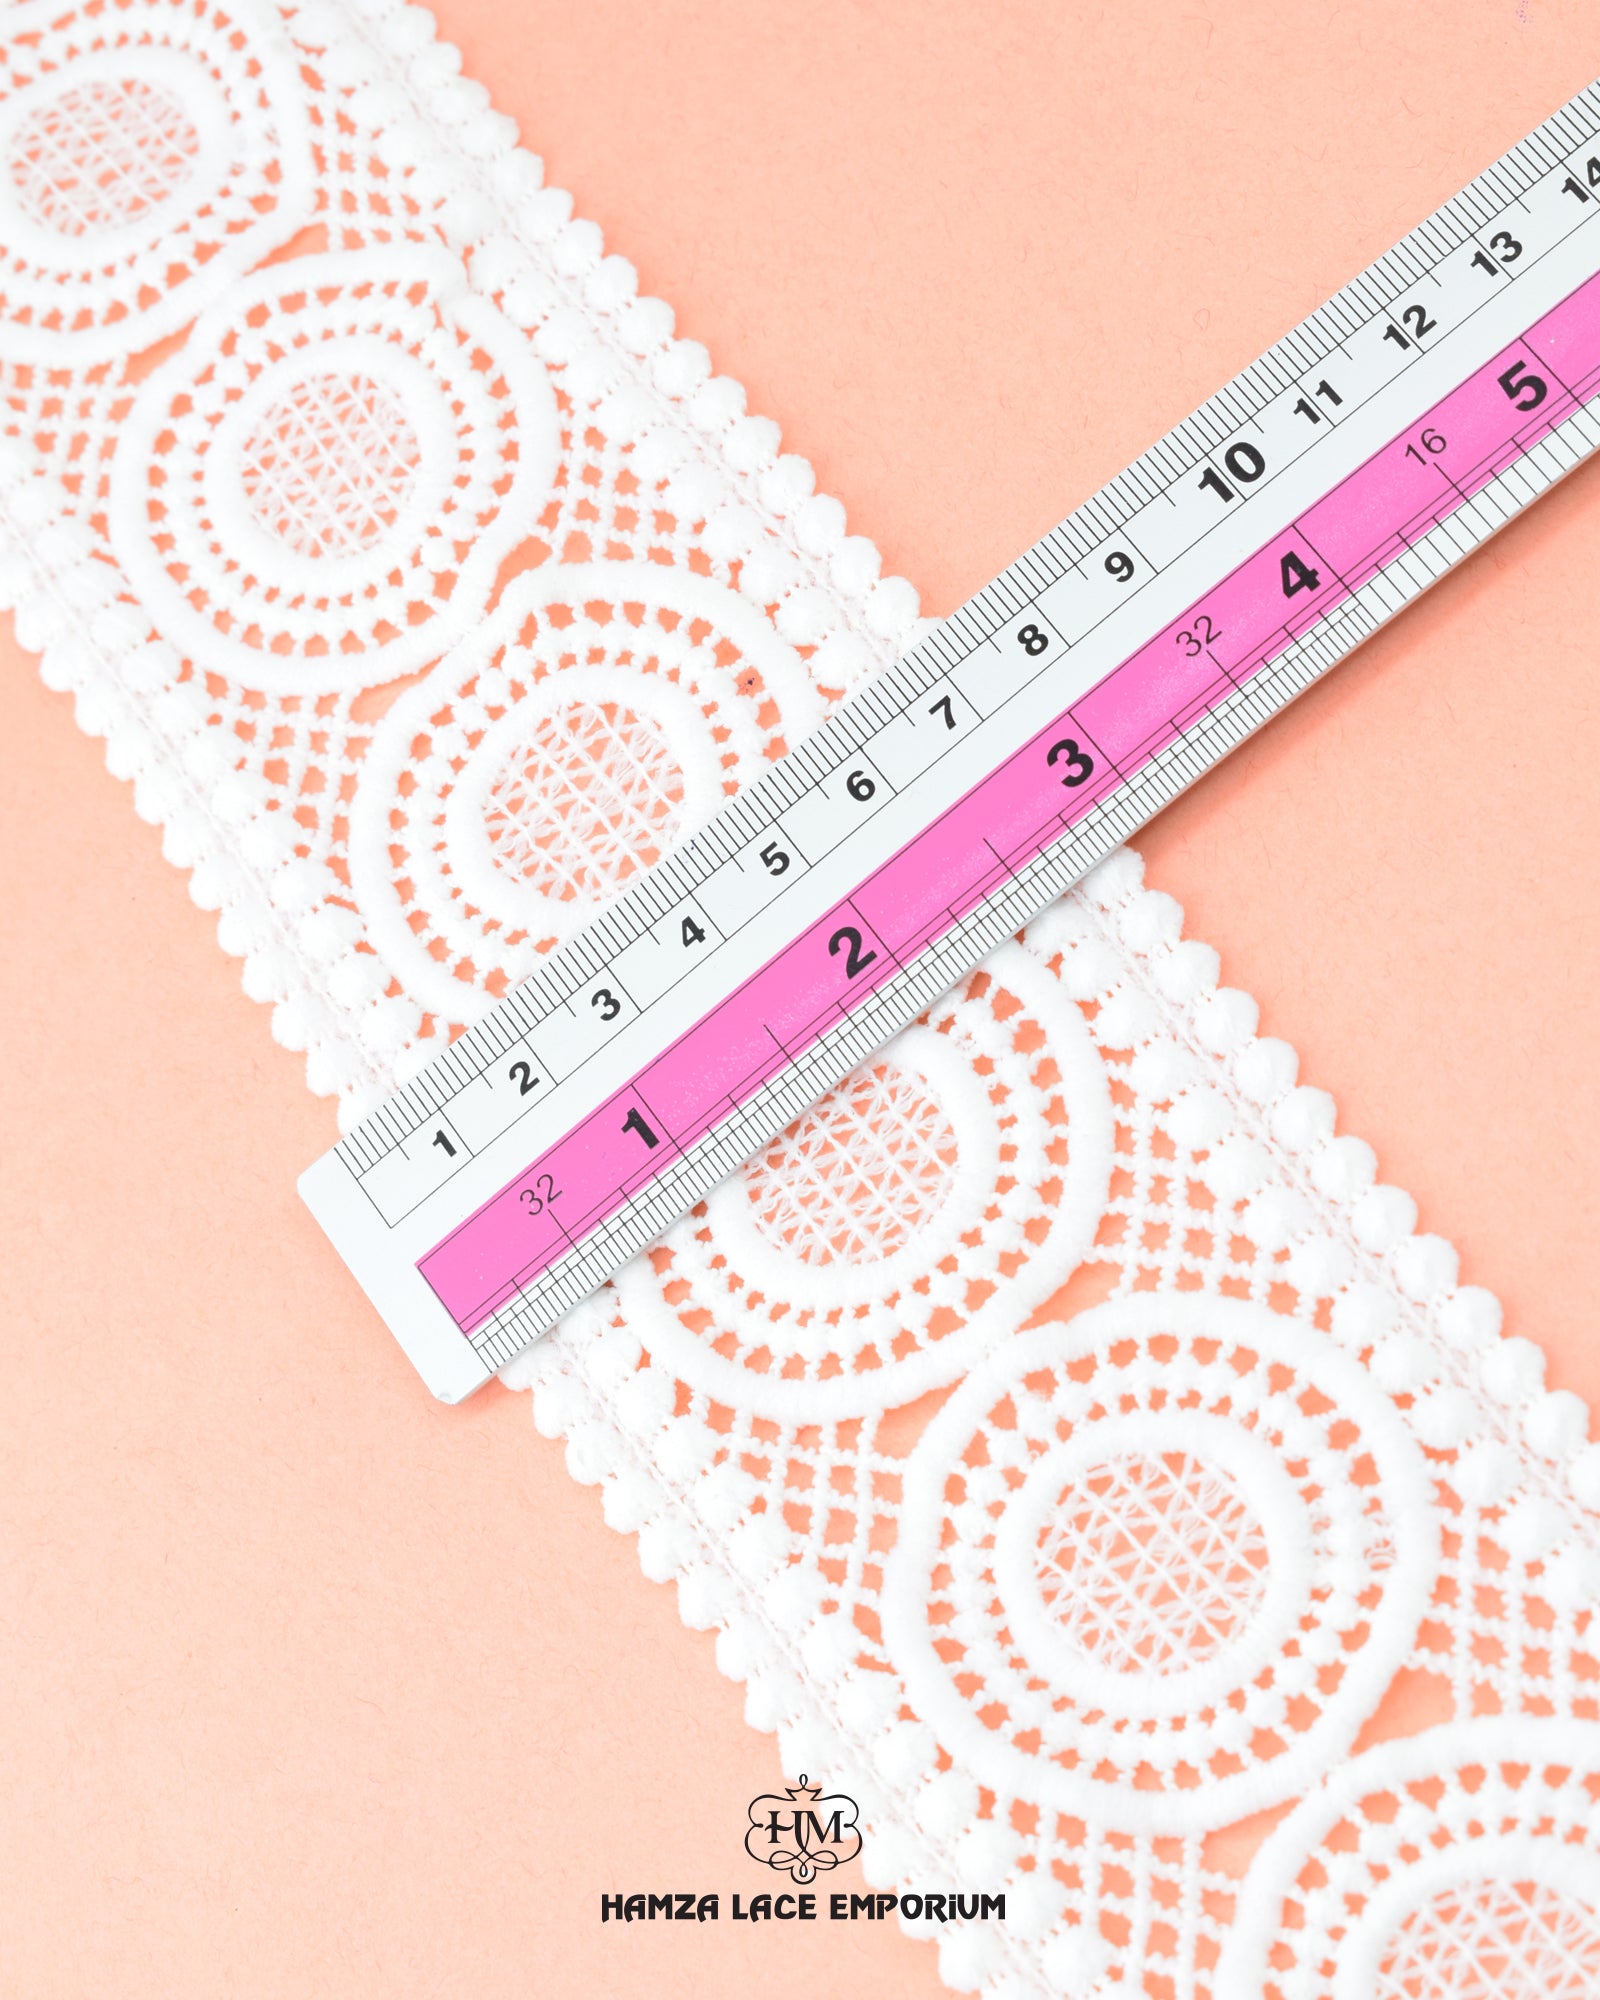 Size of the 'Center Filling Lace 23248' is shown as '3' inches with the help of a ruler